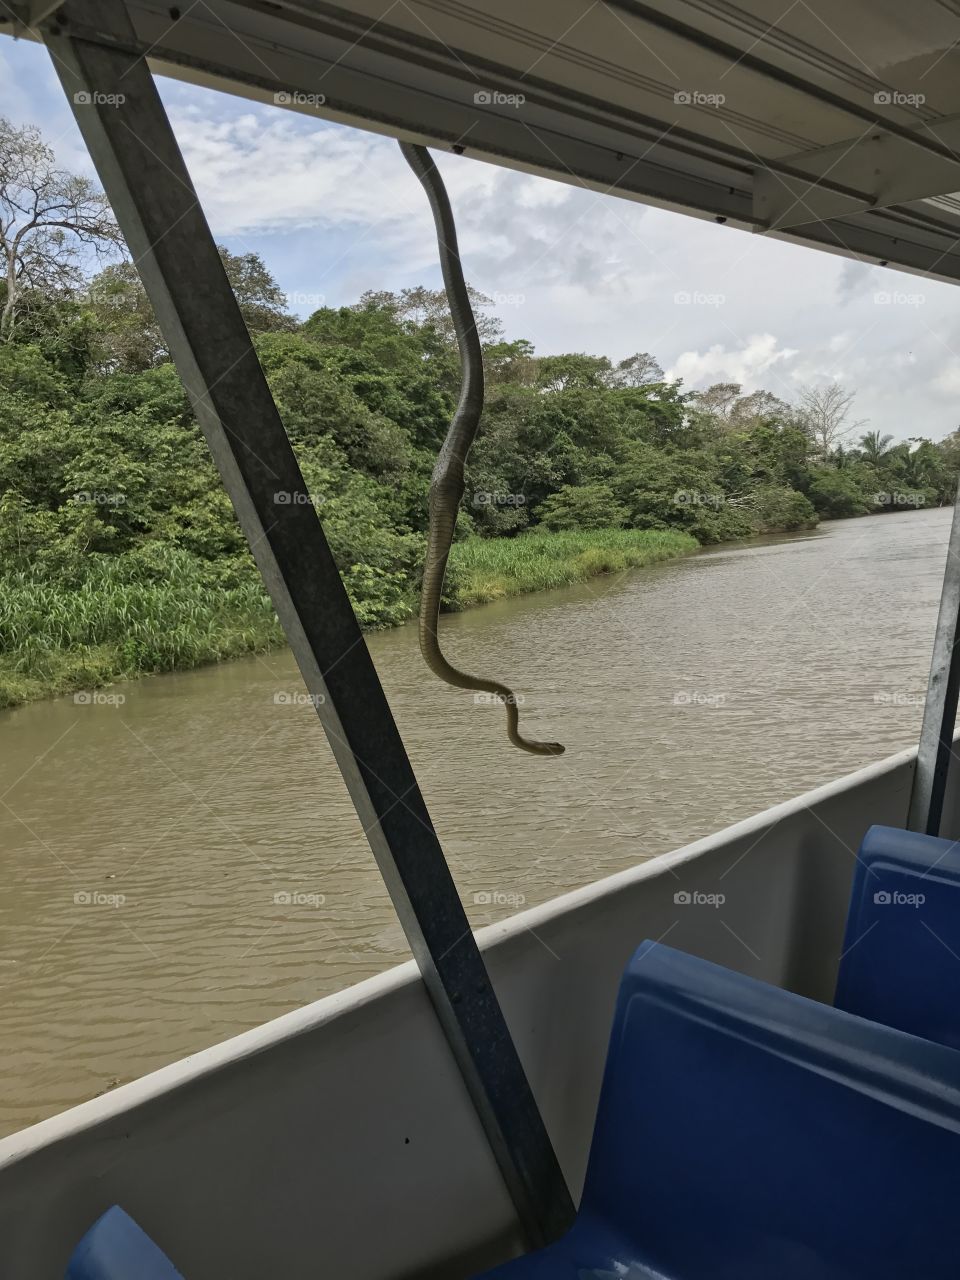 Snake hanging from boat